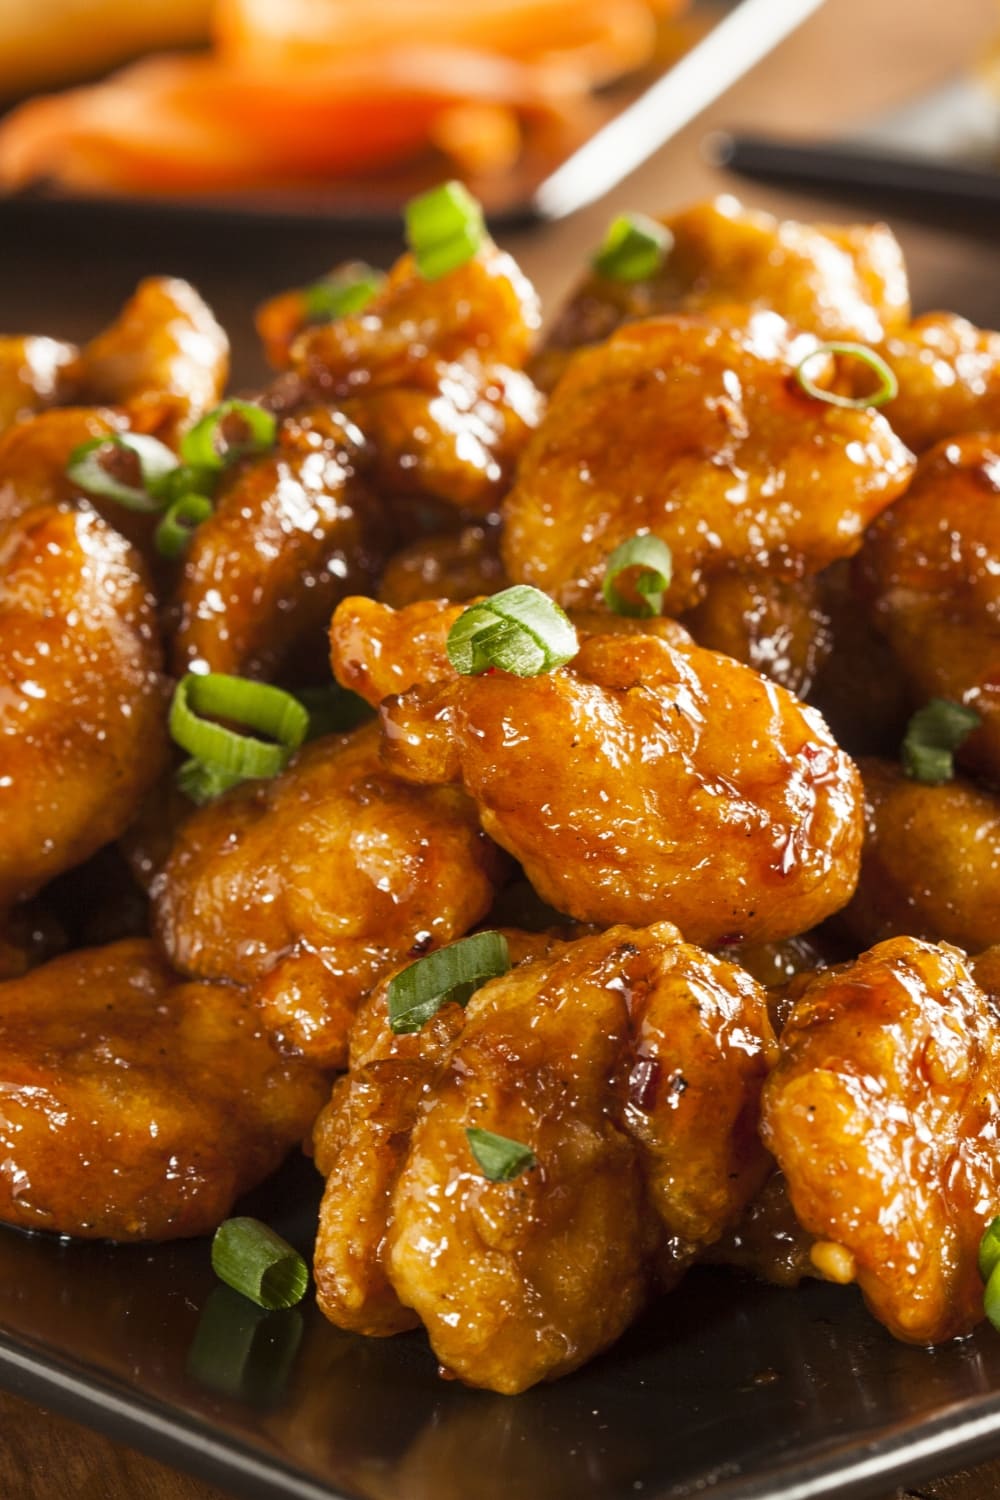 Closeup of Panda Express Orange Chicken Served on a Black Plate Topped With Chopped Onion Leaves